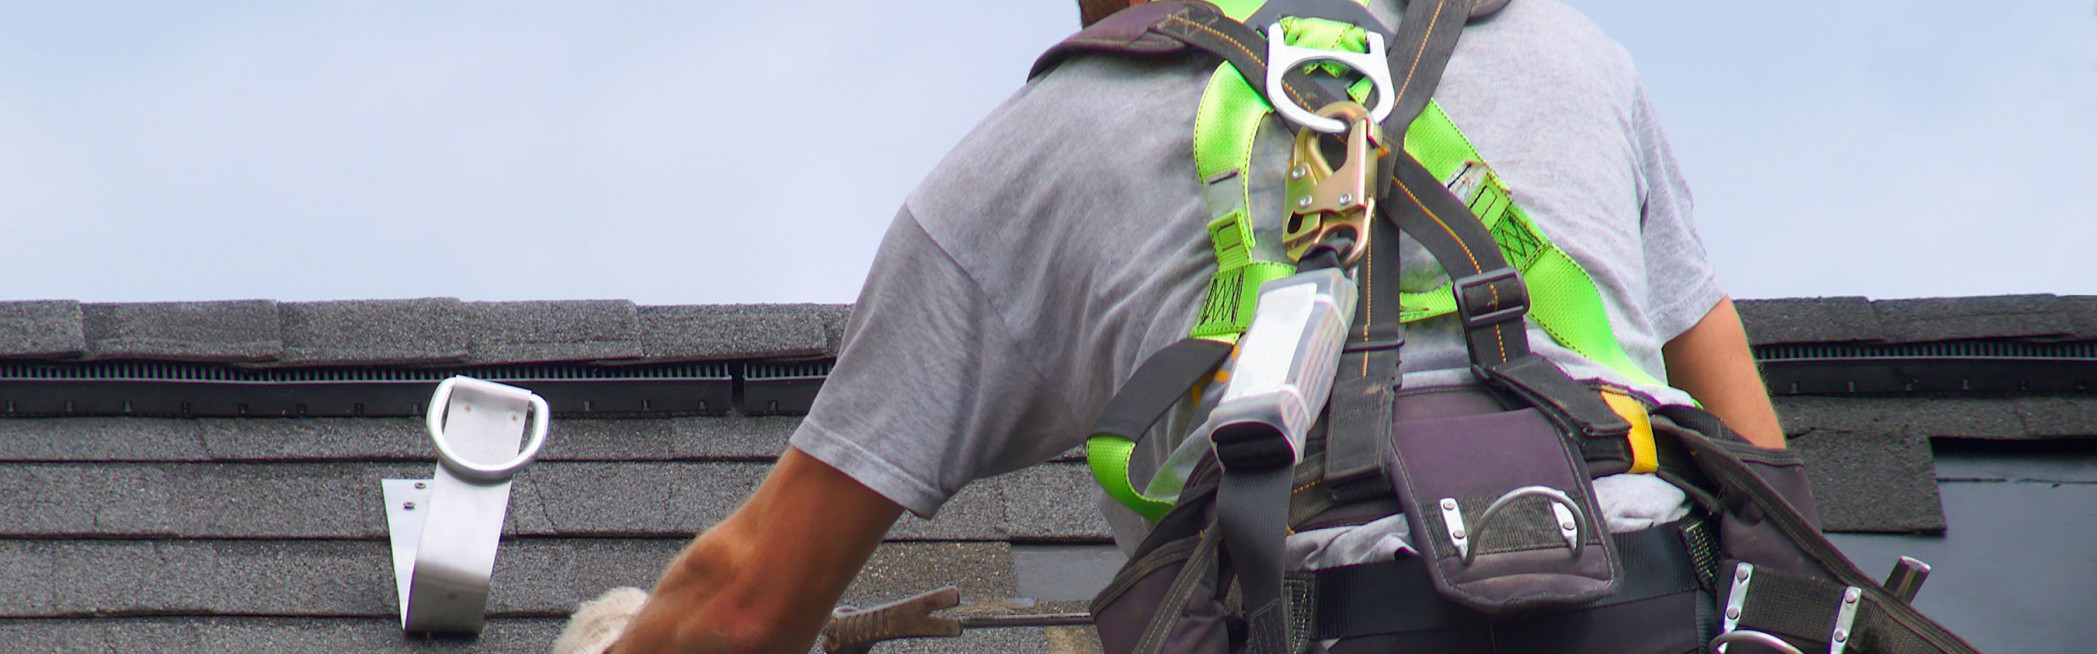 Roofer in safety harness